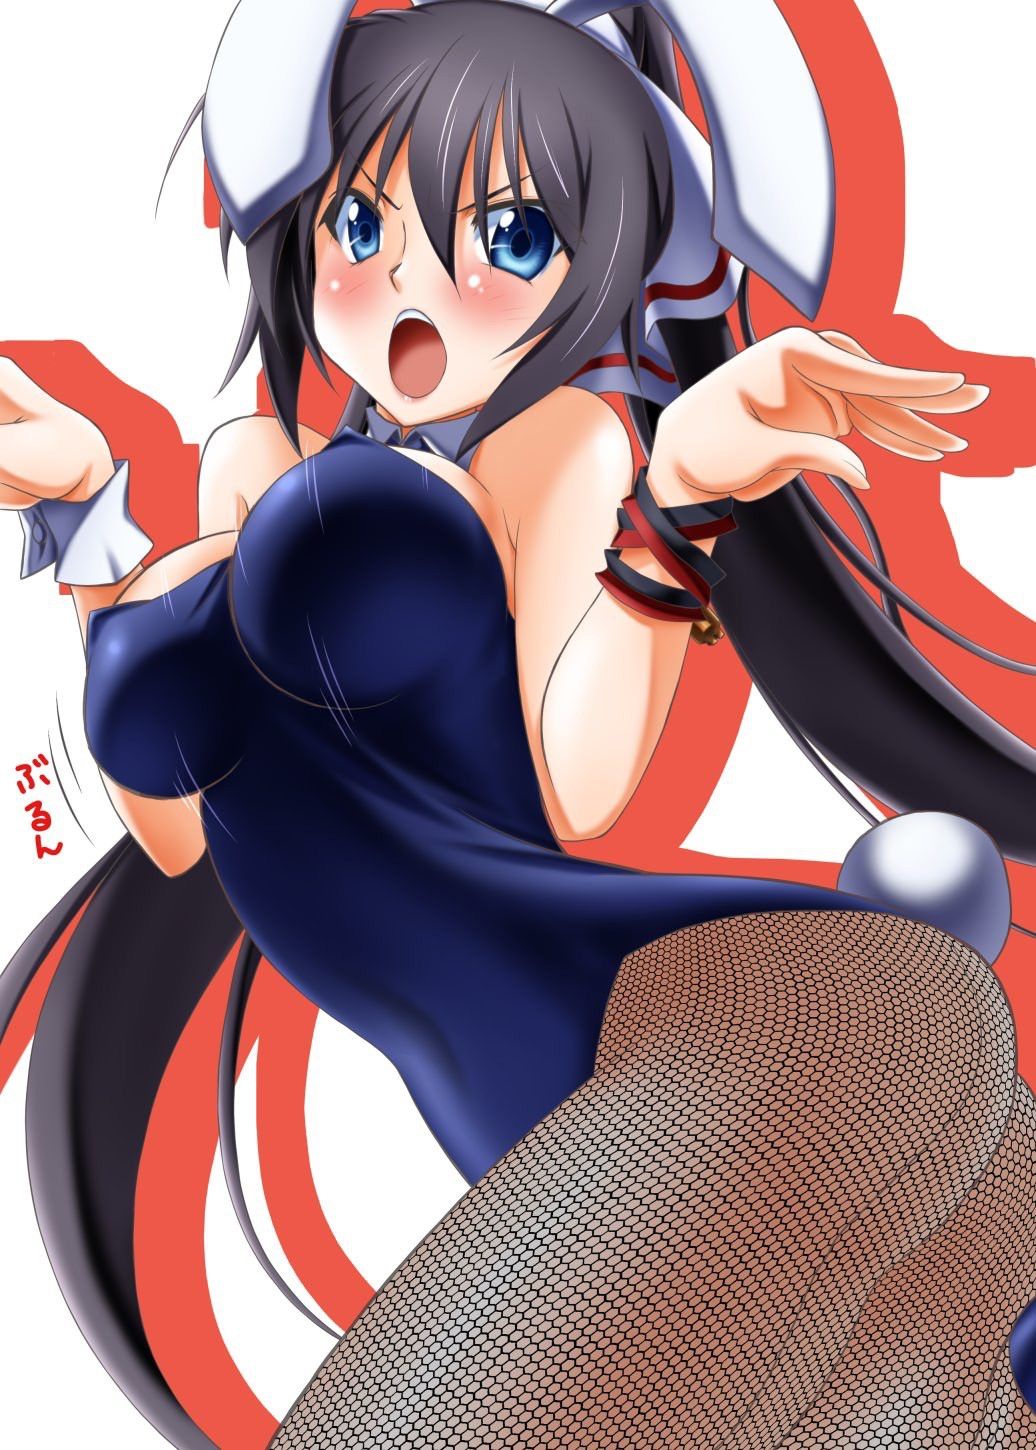 The second image of the bunny girl is too it. 1